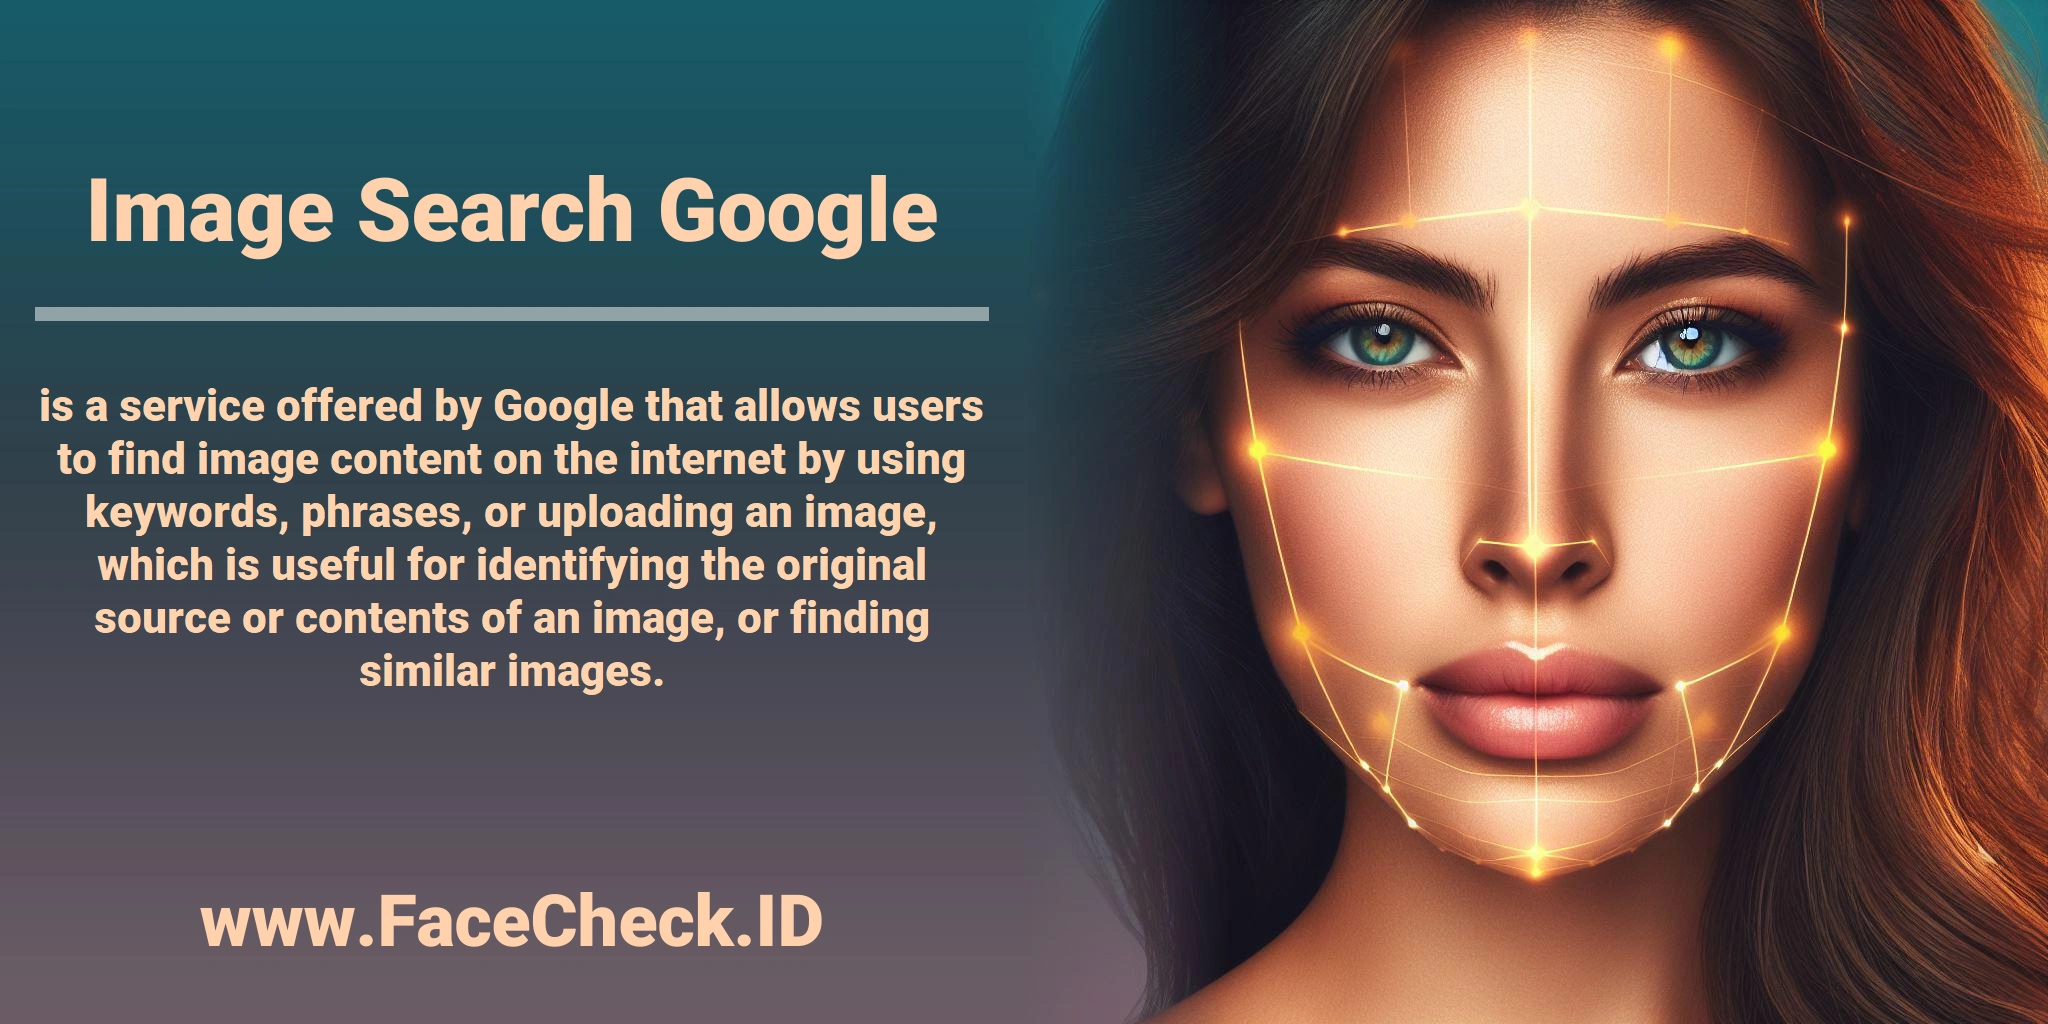 <b>Image Search Google</b> is a service offered by Google that allows users to find image content on the internet by using keywords, phrases, or uploading an image, which is useful for identifying the original source or contents of an image, or finding similar images.
